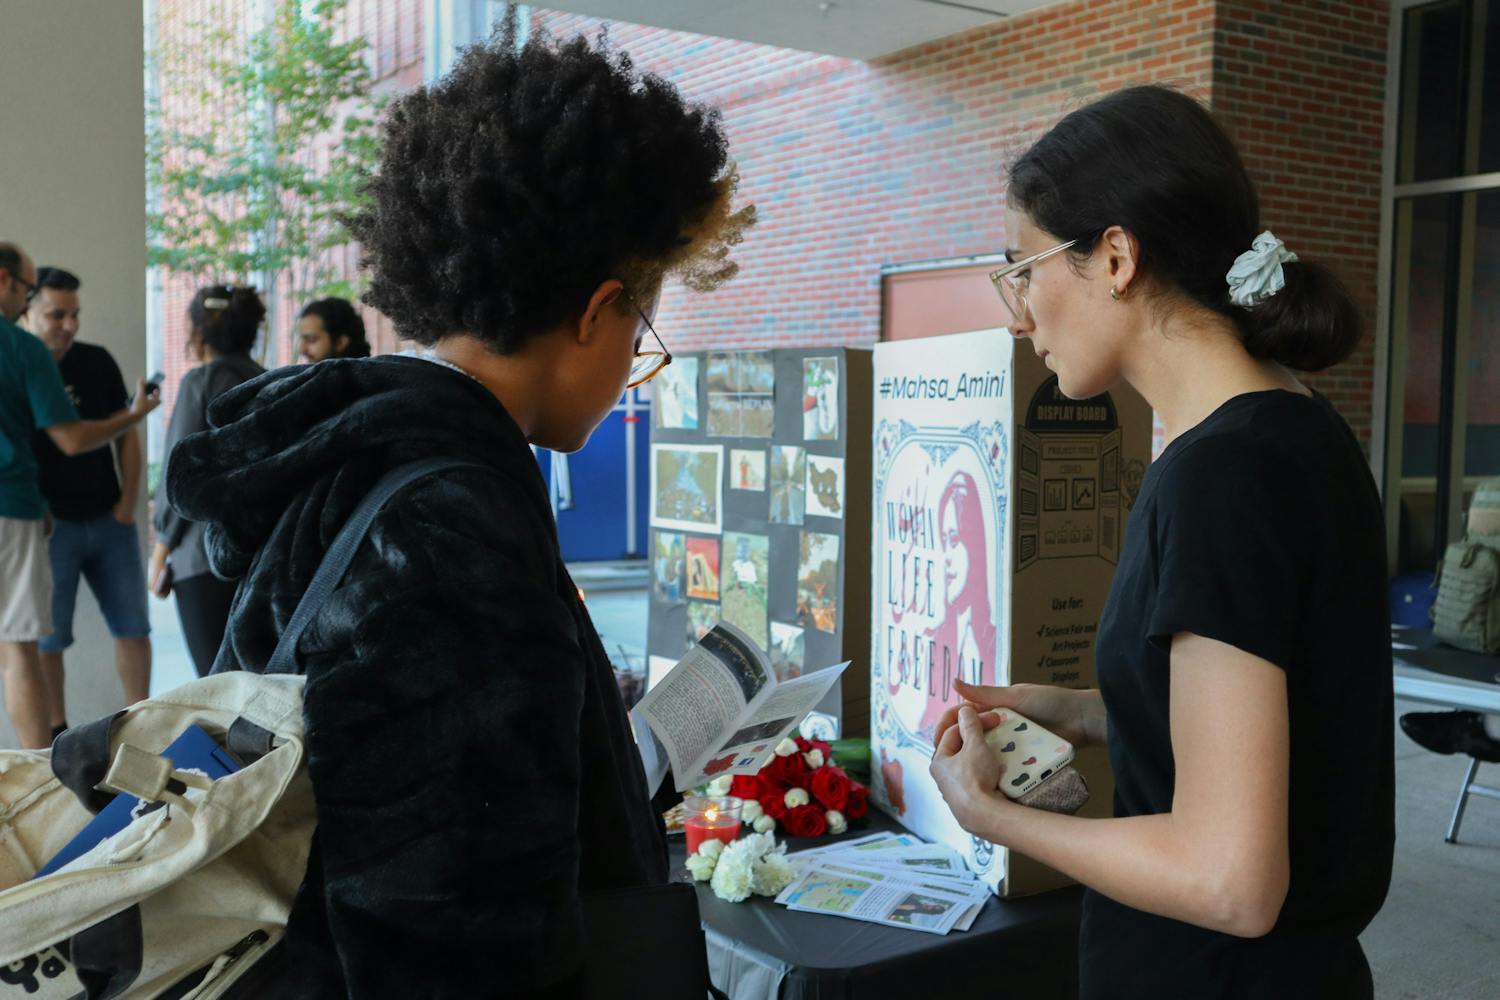 A member of the Iranian Student Association passes an educational brochure about Mahsa Amini’s death and Iranian hijab laws to a passerby, Thursday, Sept. 22, 2022.